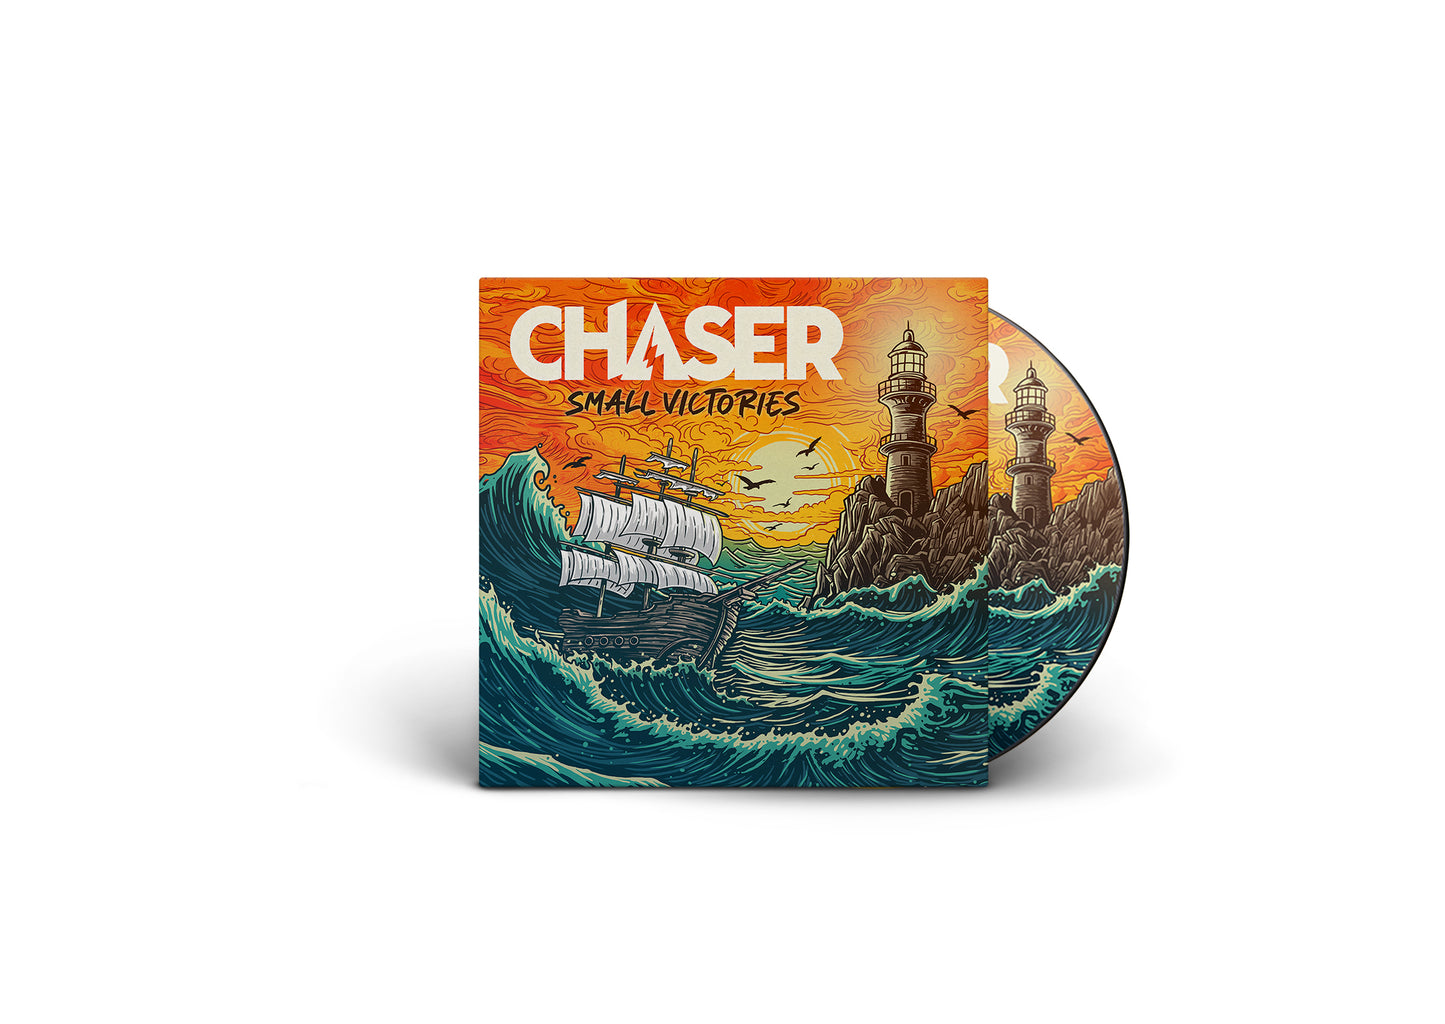 CHASER - "Small Victories" (SBAM) (LP/CD)